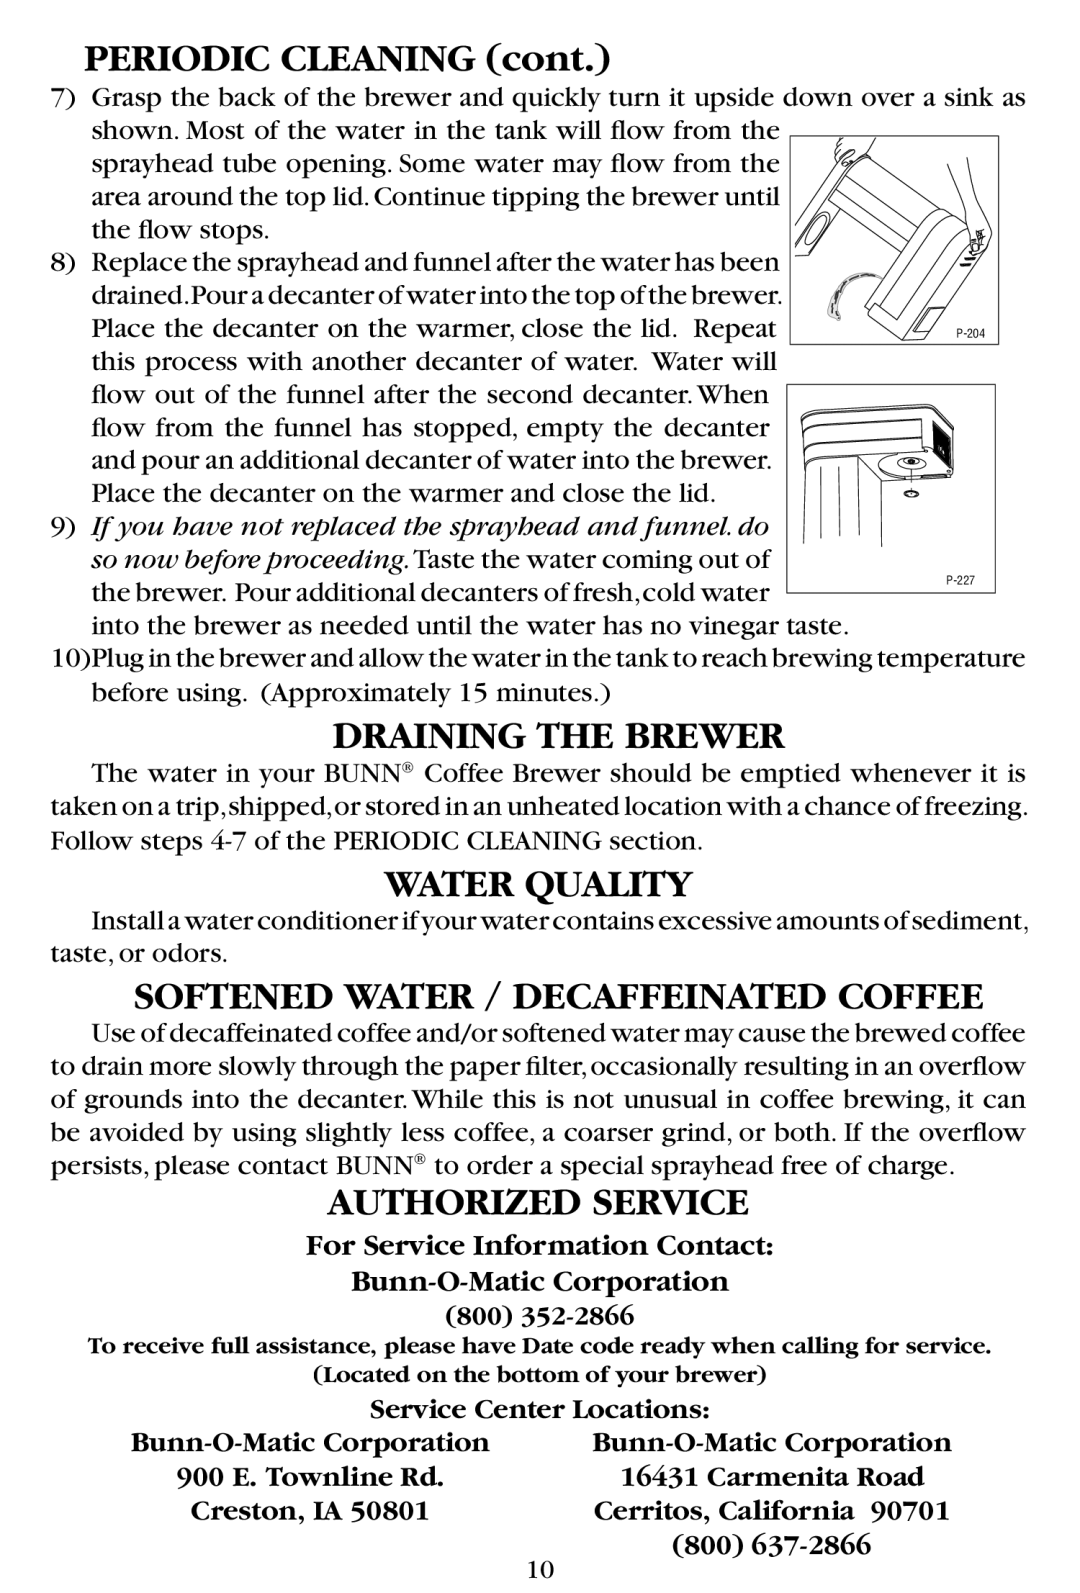 Bunn B10, GR10-B manual PERIODIC CLEANING cont, Draining The Brewer, Water Quality, Softened Water / Decaffeinated Coffee 